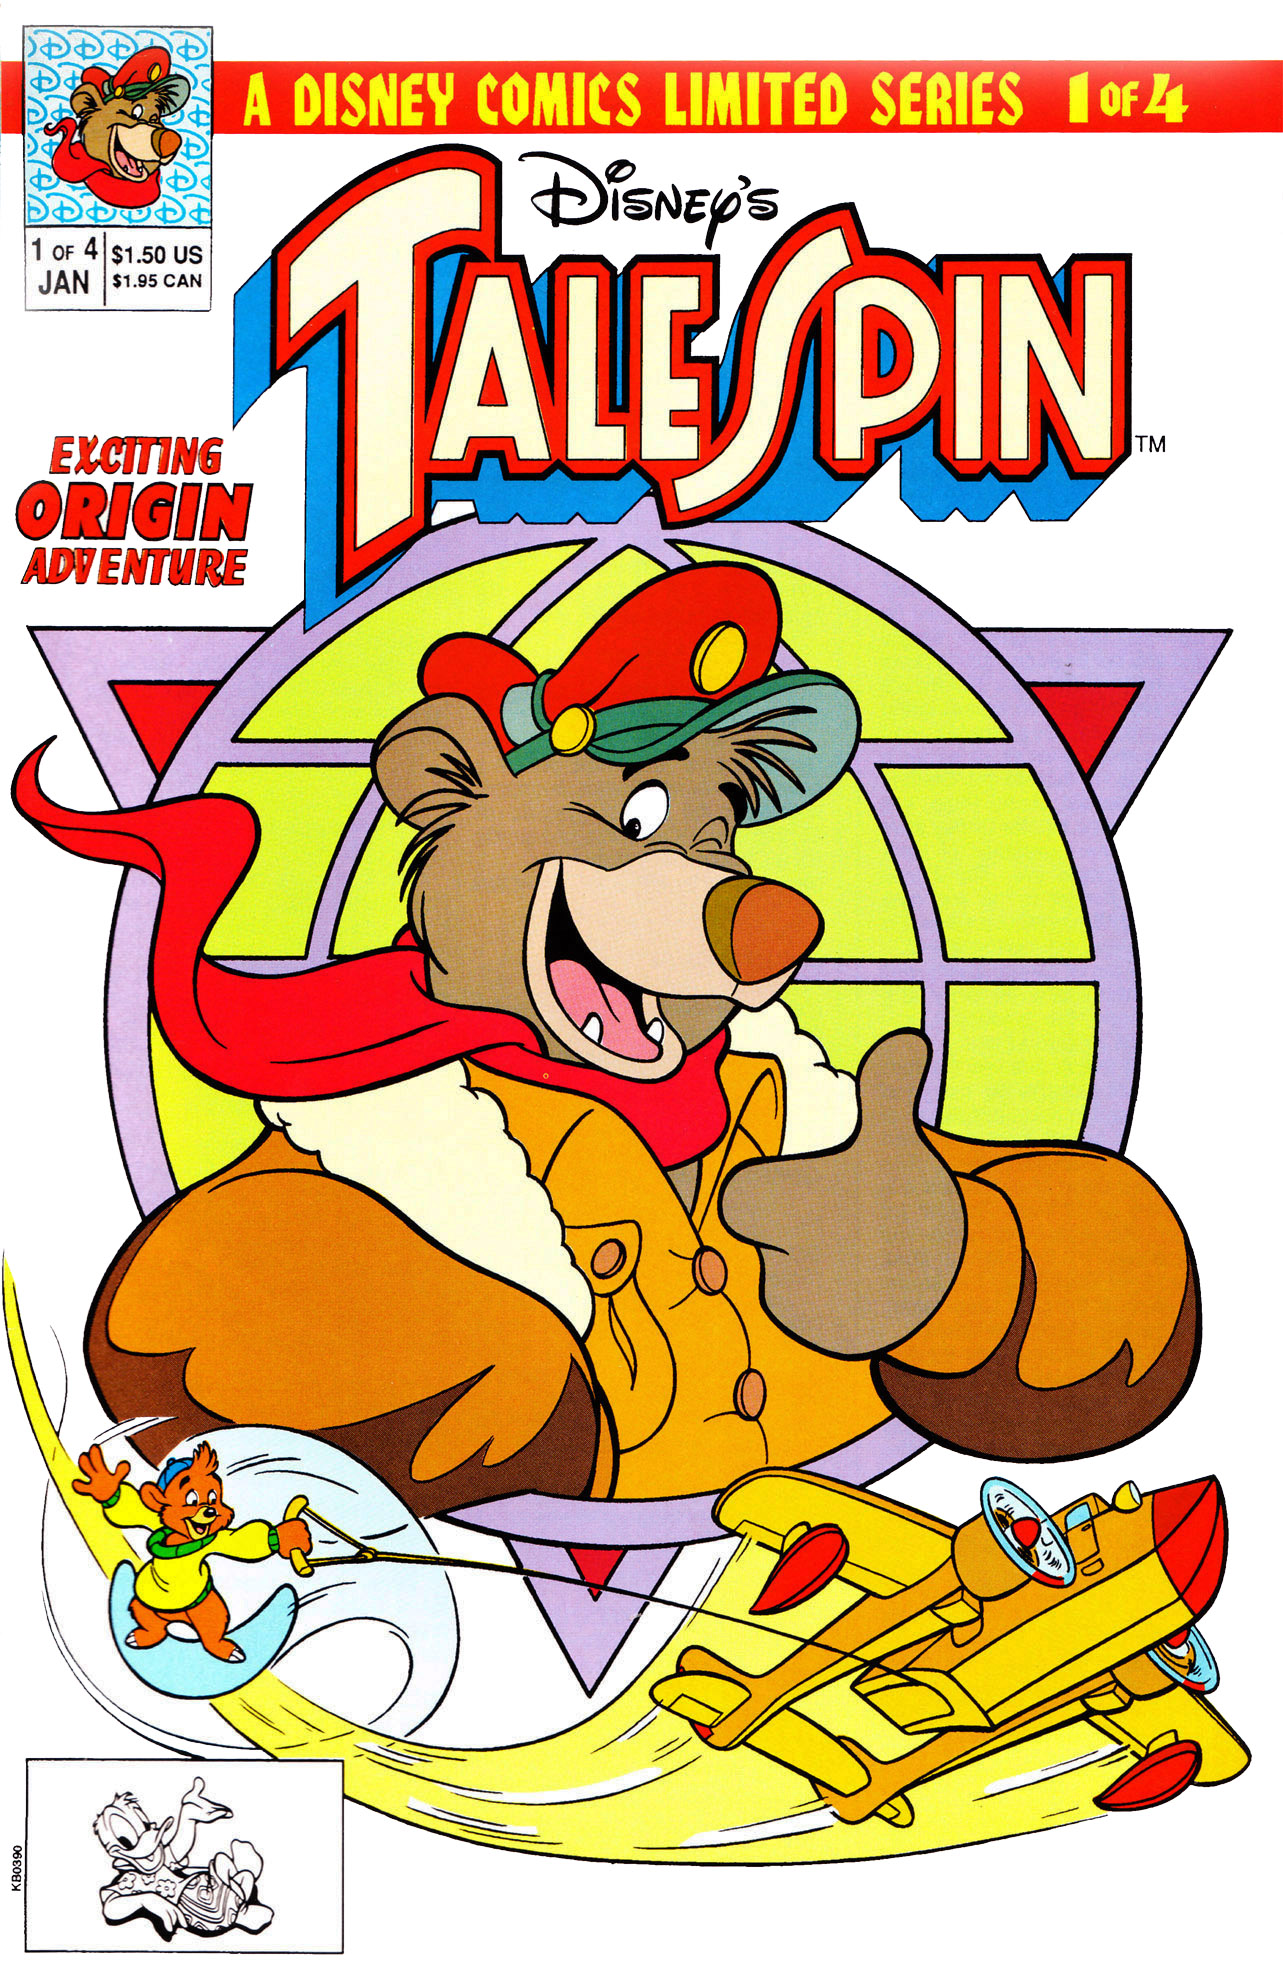 TaleSpin (1991) : Free Download, Borrow, and Streaming : Internet Archive